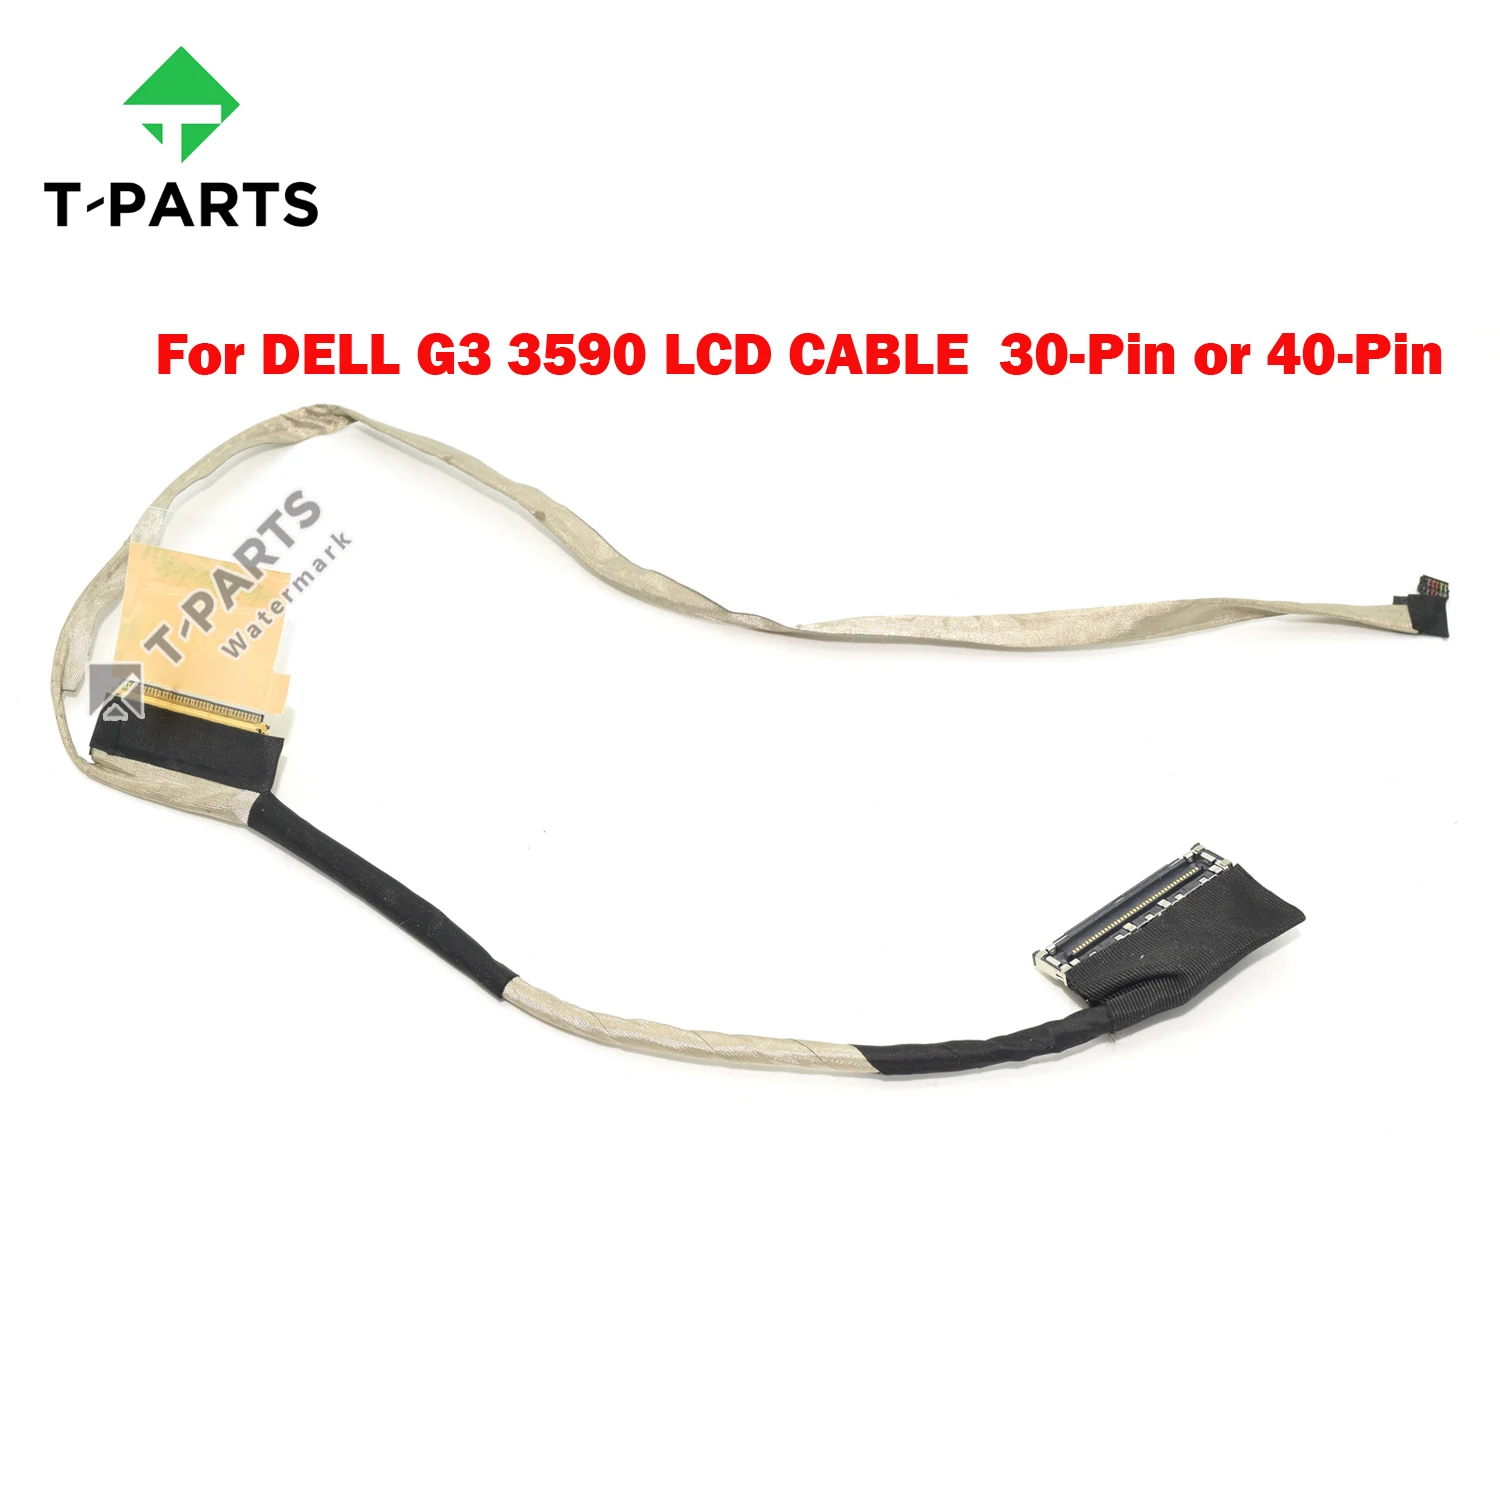 USB CABLE CORD FOR HP PSC 1210 1315 1610 1510 2355 1311 1507 PRO P1102w  PRINTER - AliExpress